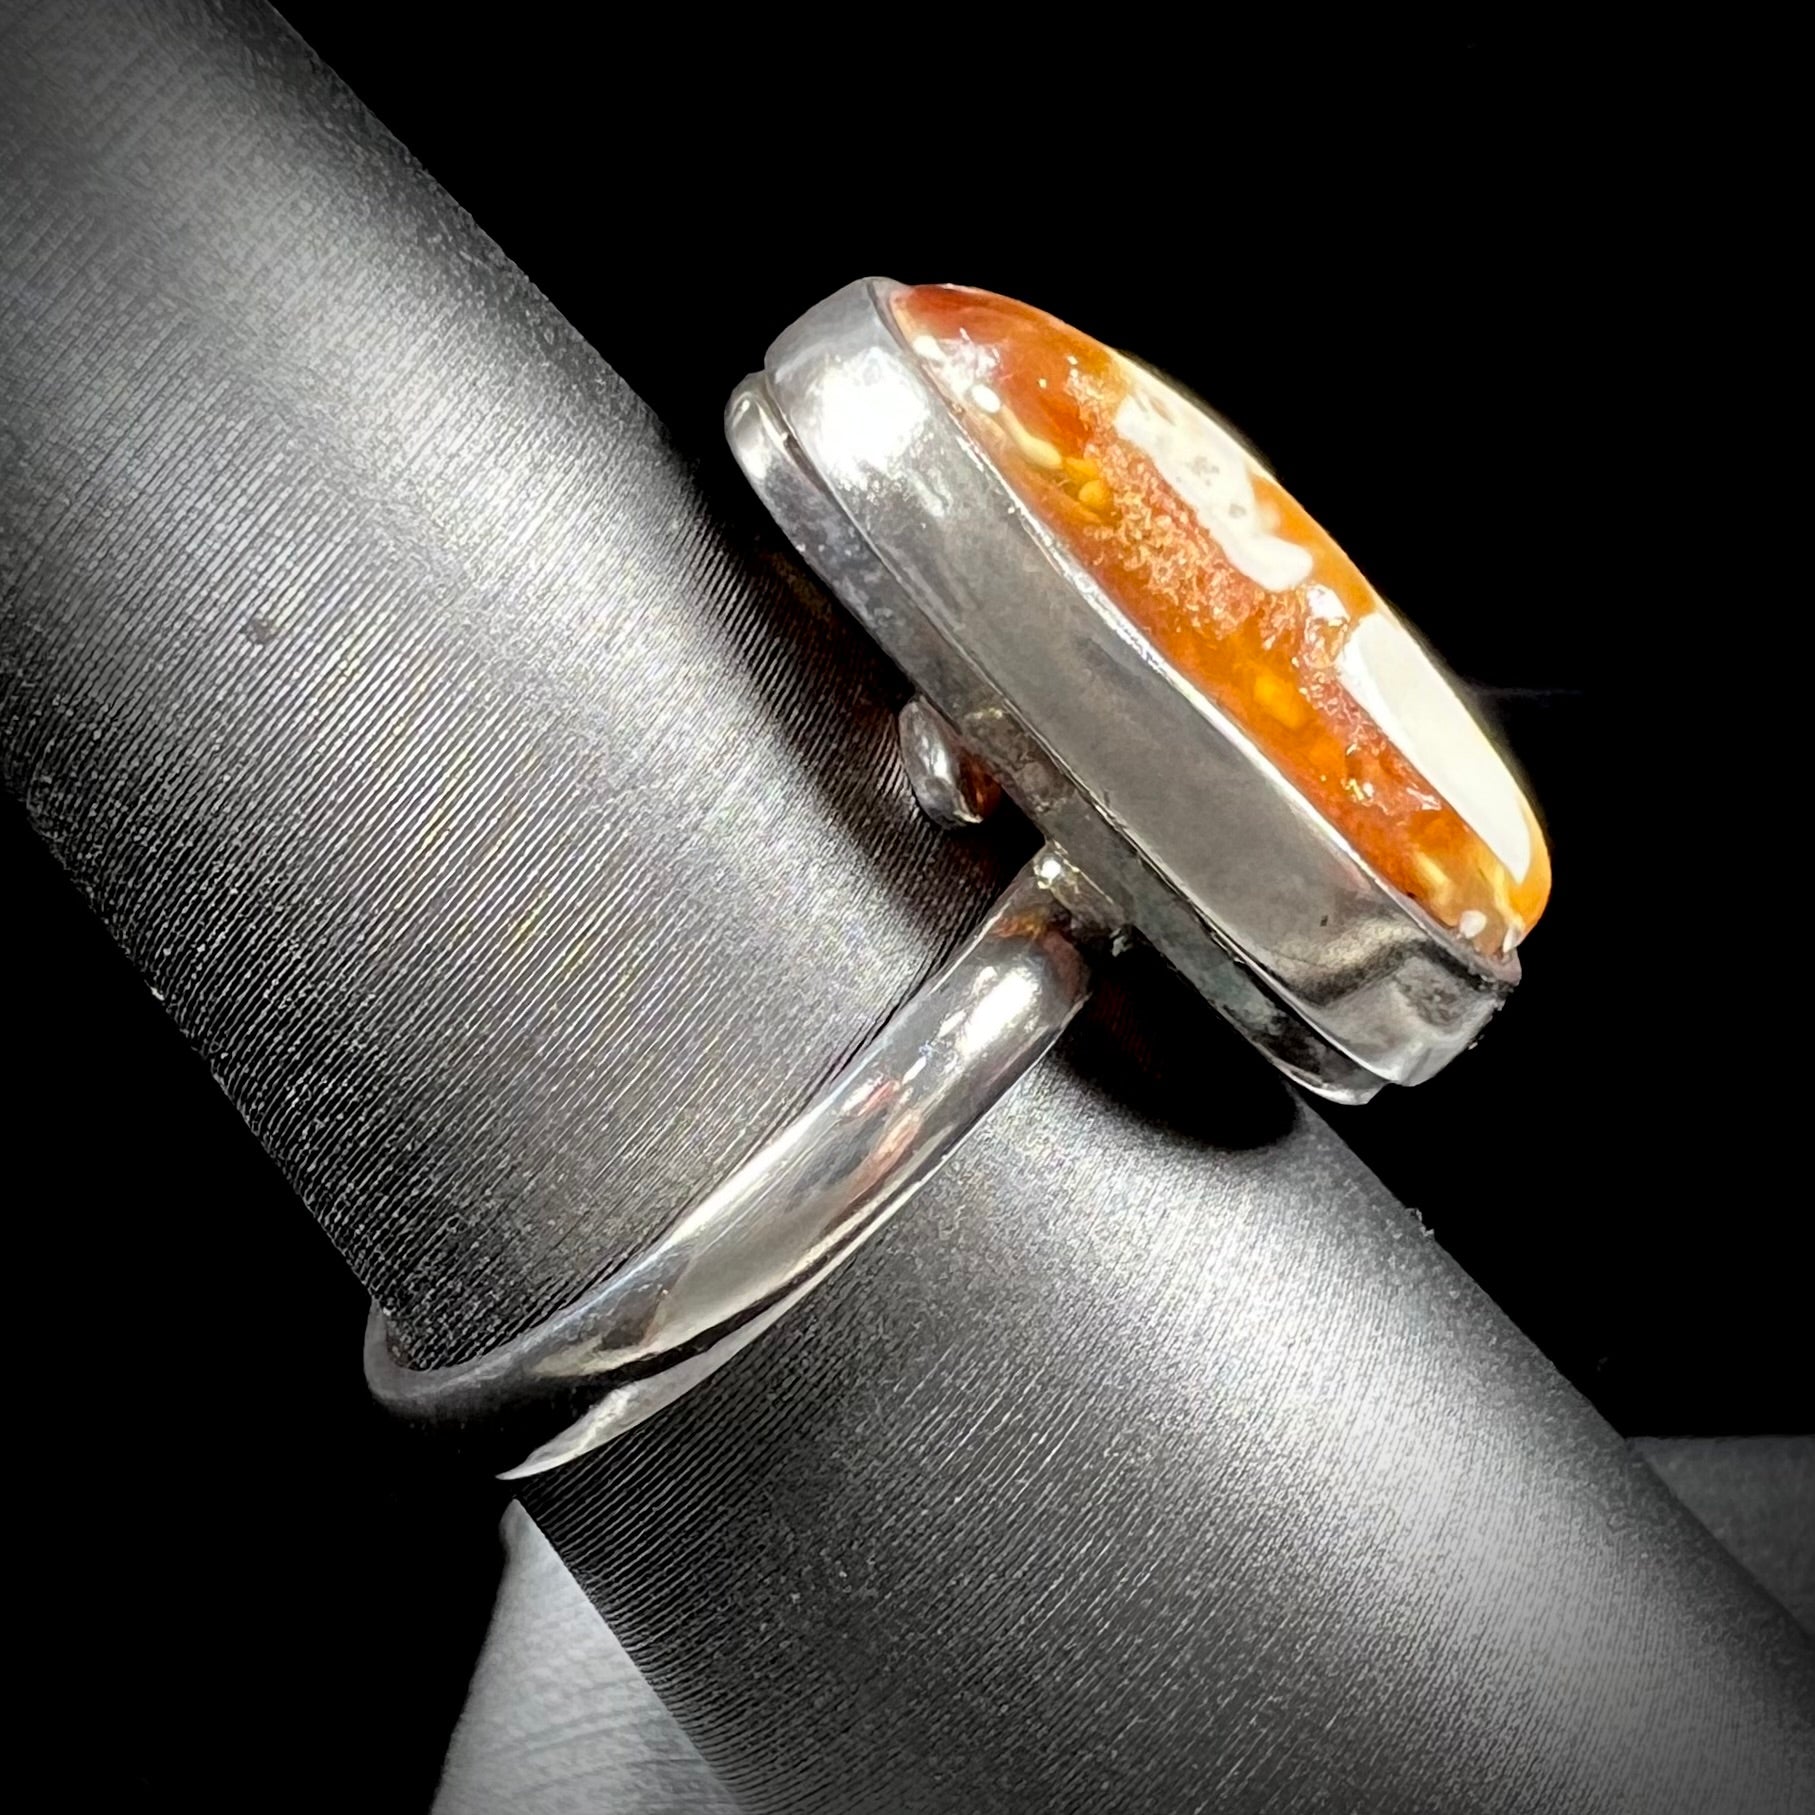 An adjustable sterling silver solitaire ring set with a cabochon cut butterscotch amber stone.